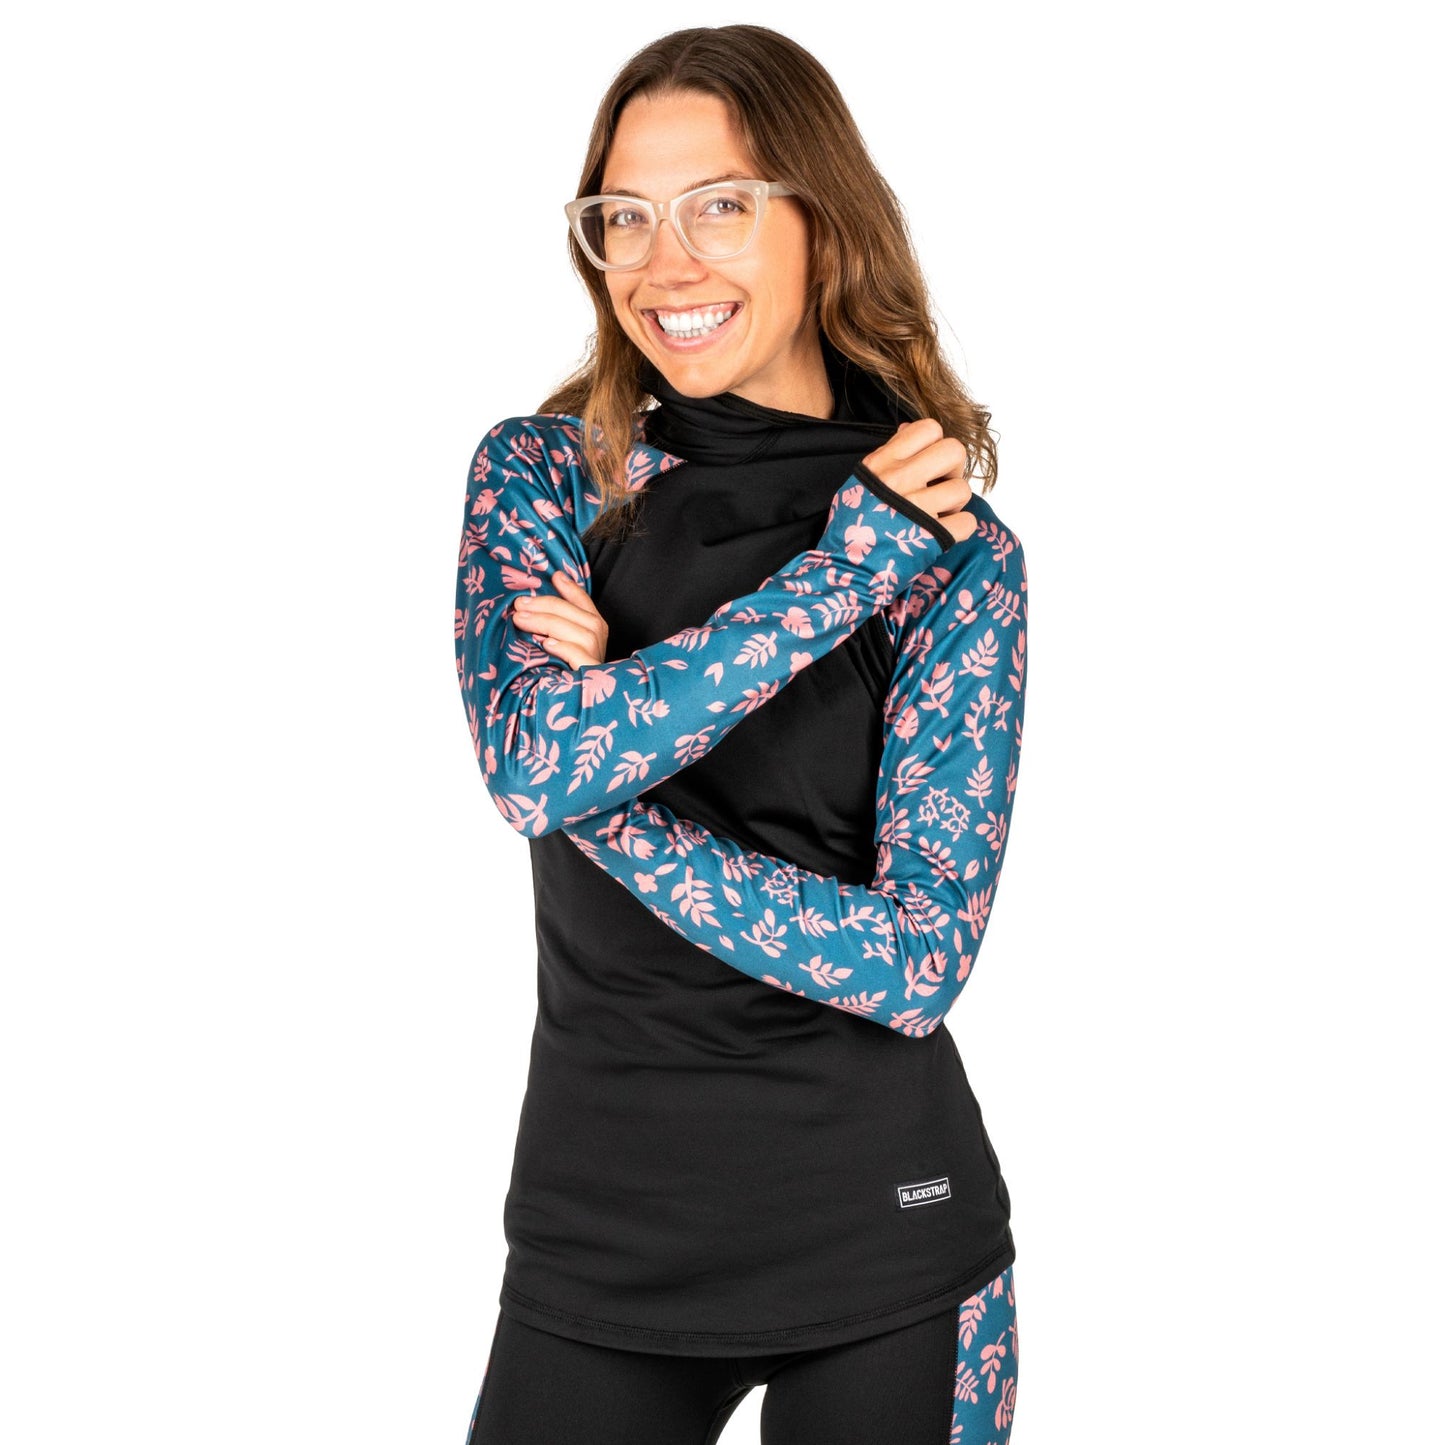 Blackstrap Women's Therma Baselayer Hooded Top Tiny Floral Base Layer Tops